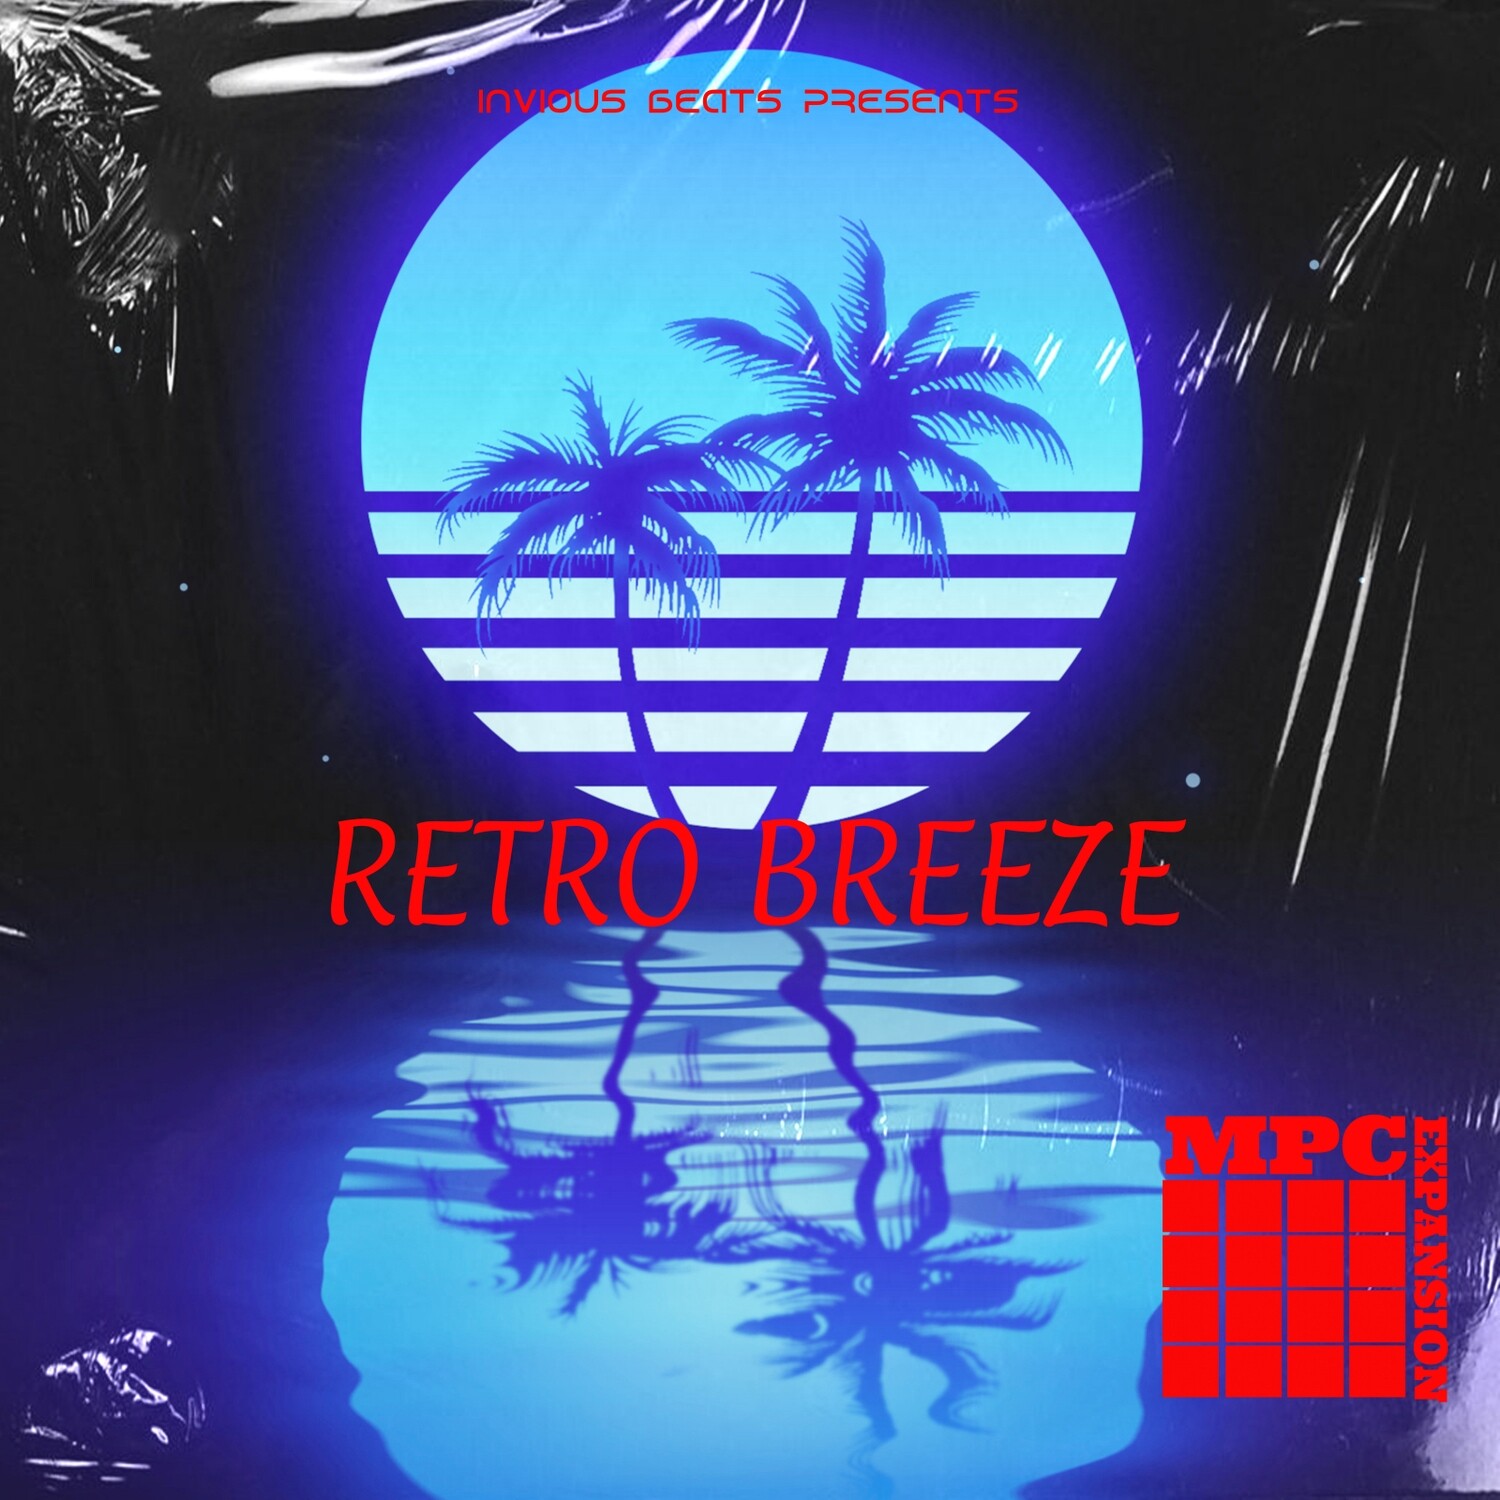 MPC EXPANSION 'RETRO BREEZE' by INVIOUS